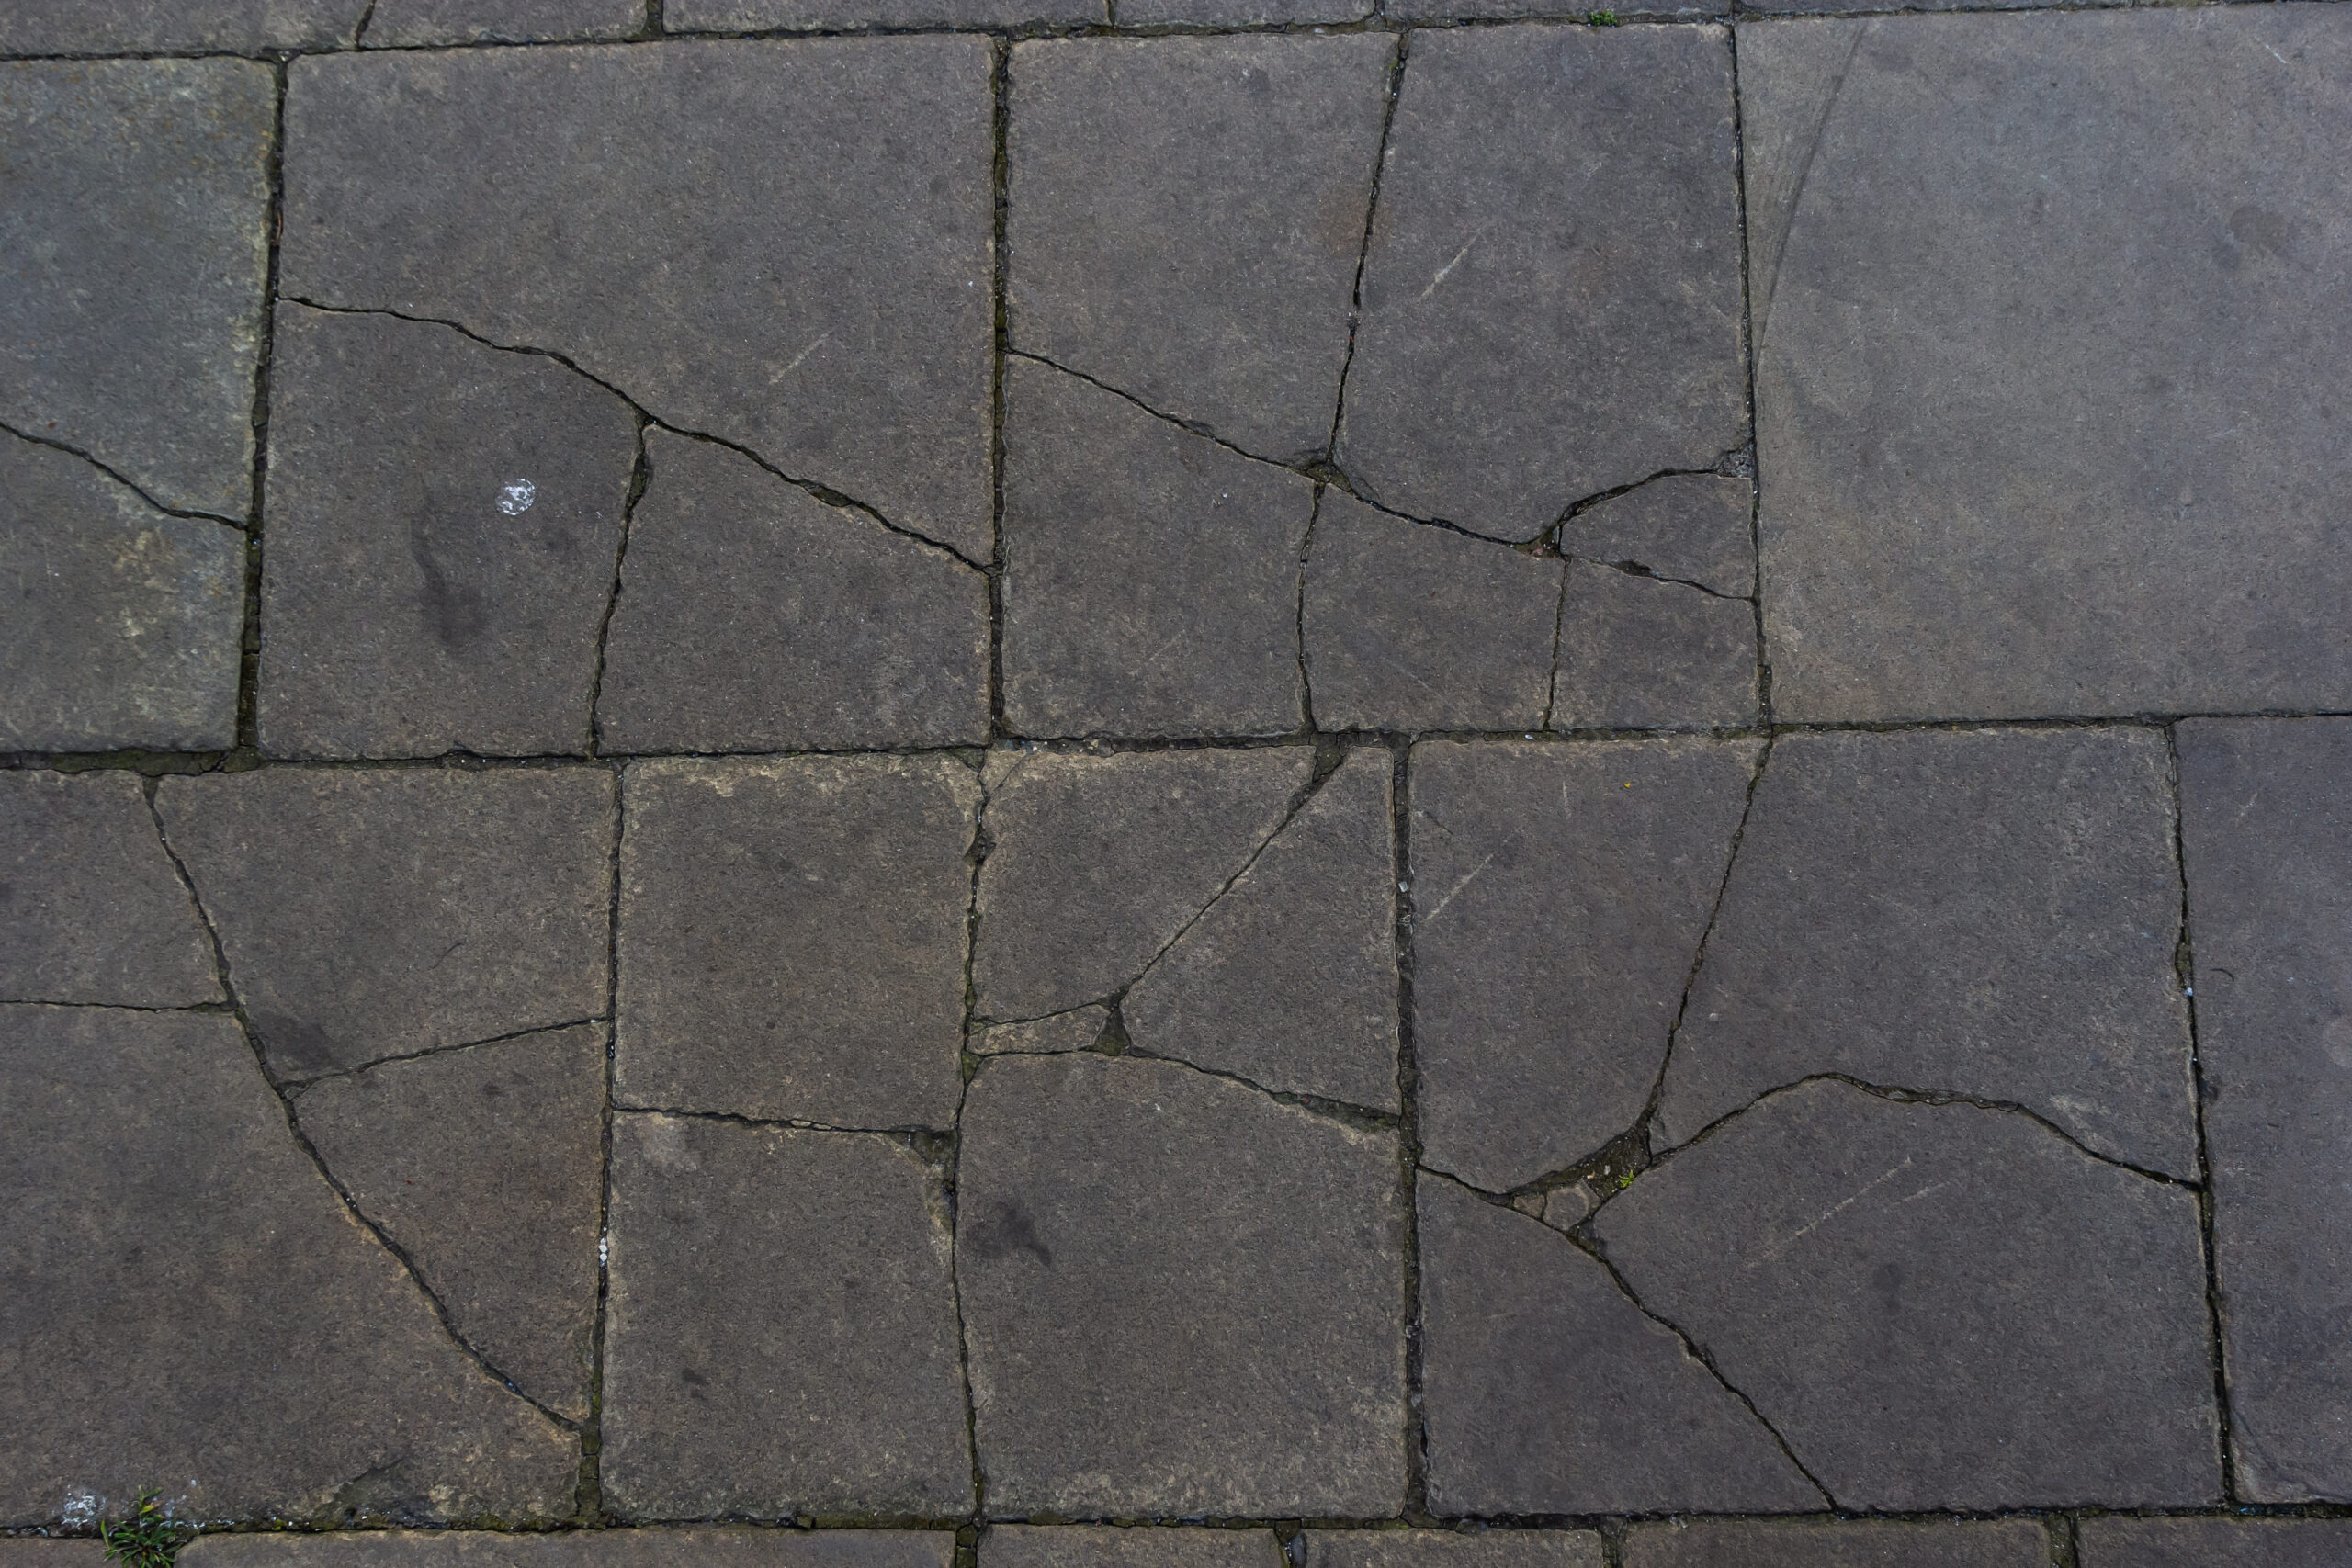 Several squares of gray concrete pavers. Most of the have severe cracks running through them.